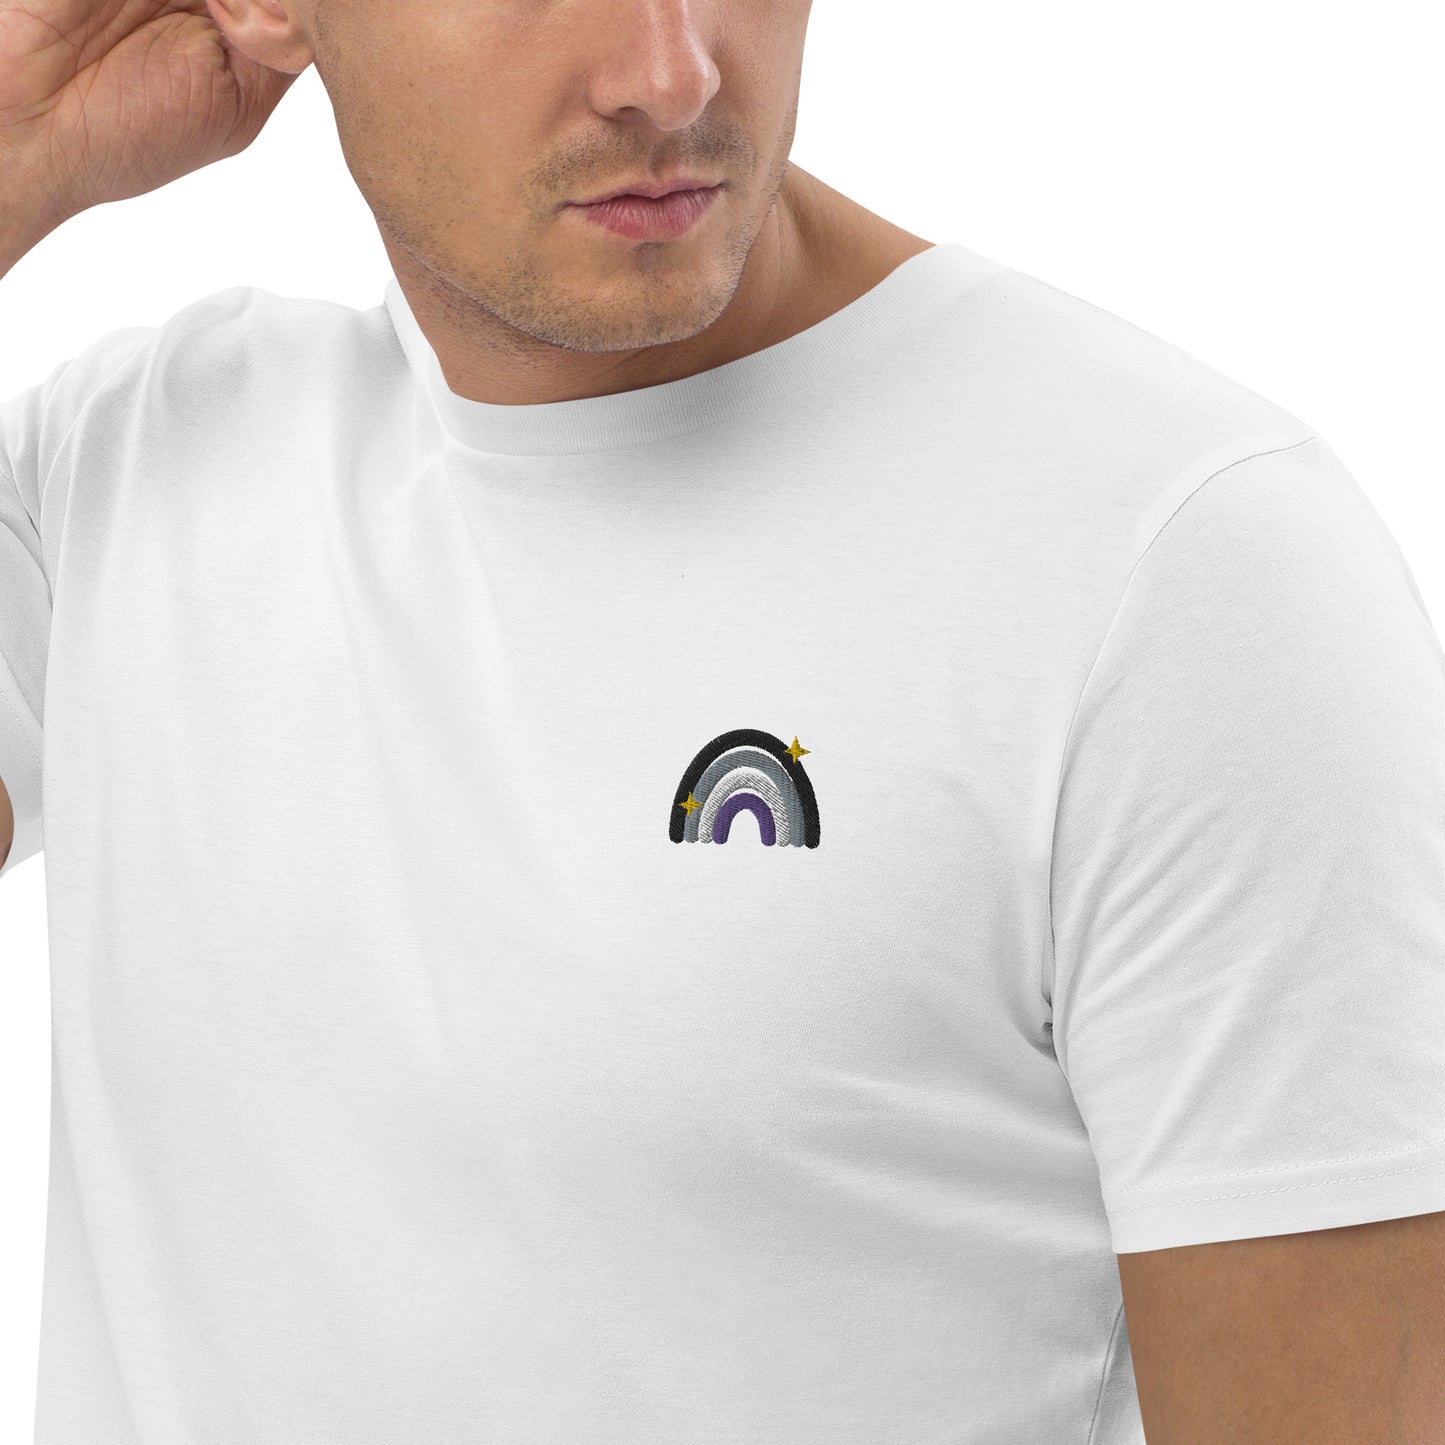 Organic Cotton T-shirt: Asexual Rainbow Embroidery